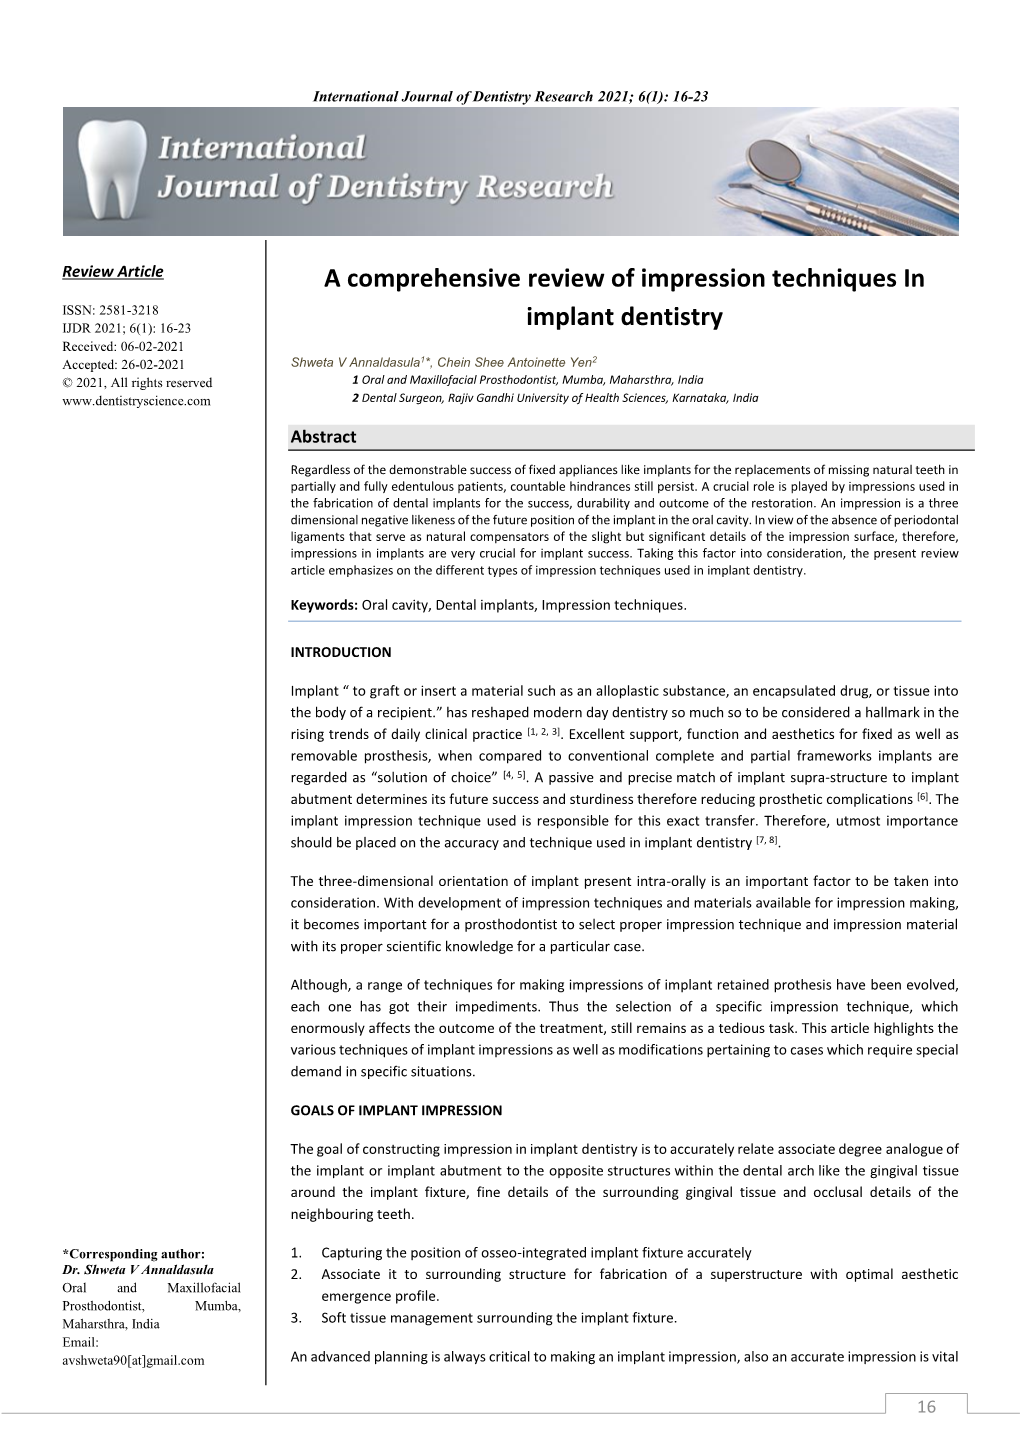 A Comprehensive Review of Impression Techniques in Implant